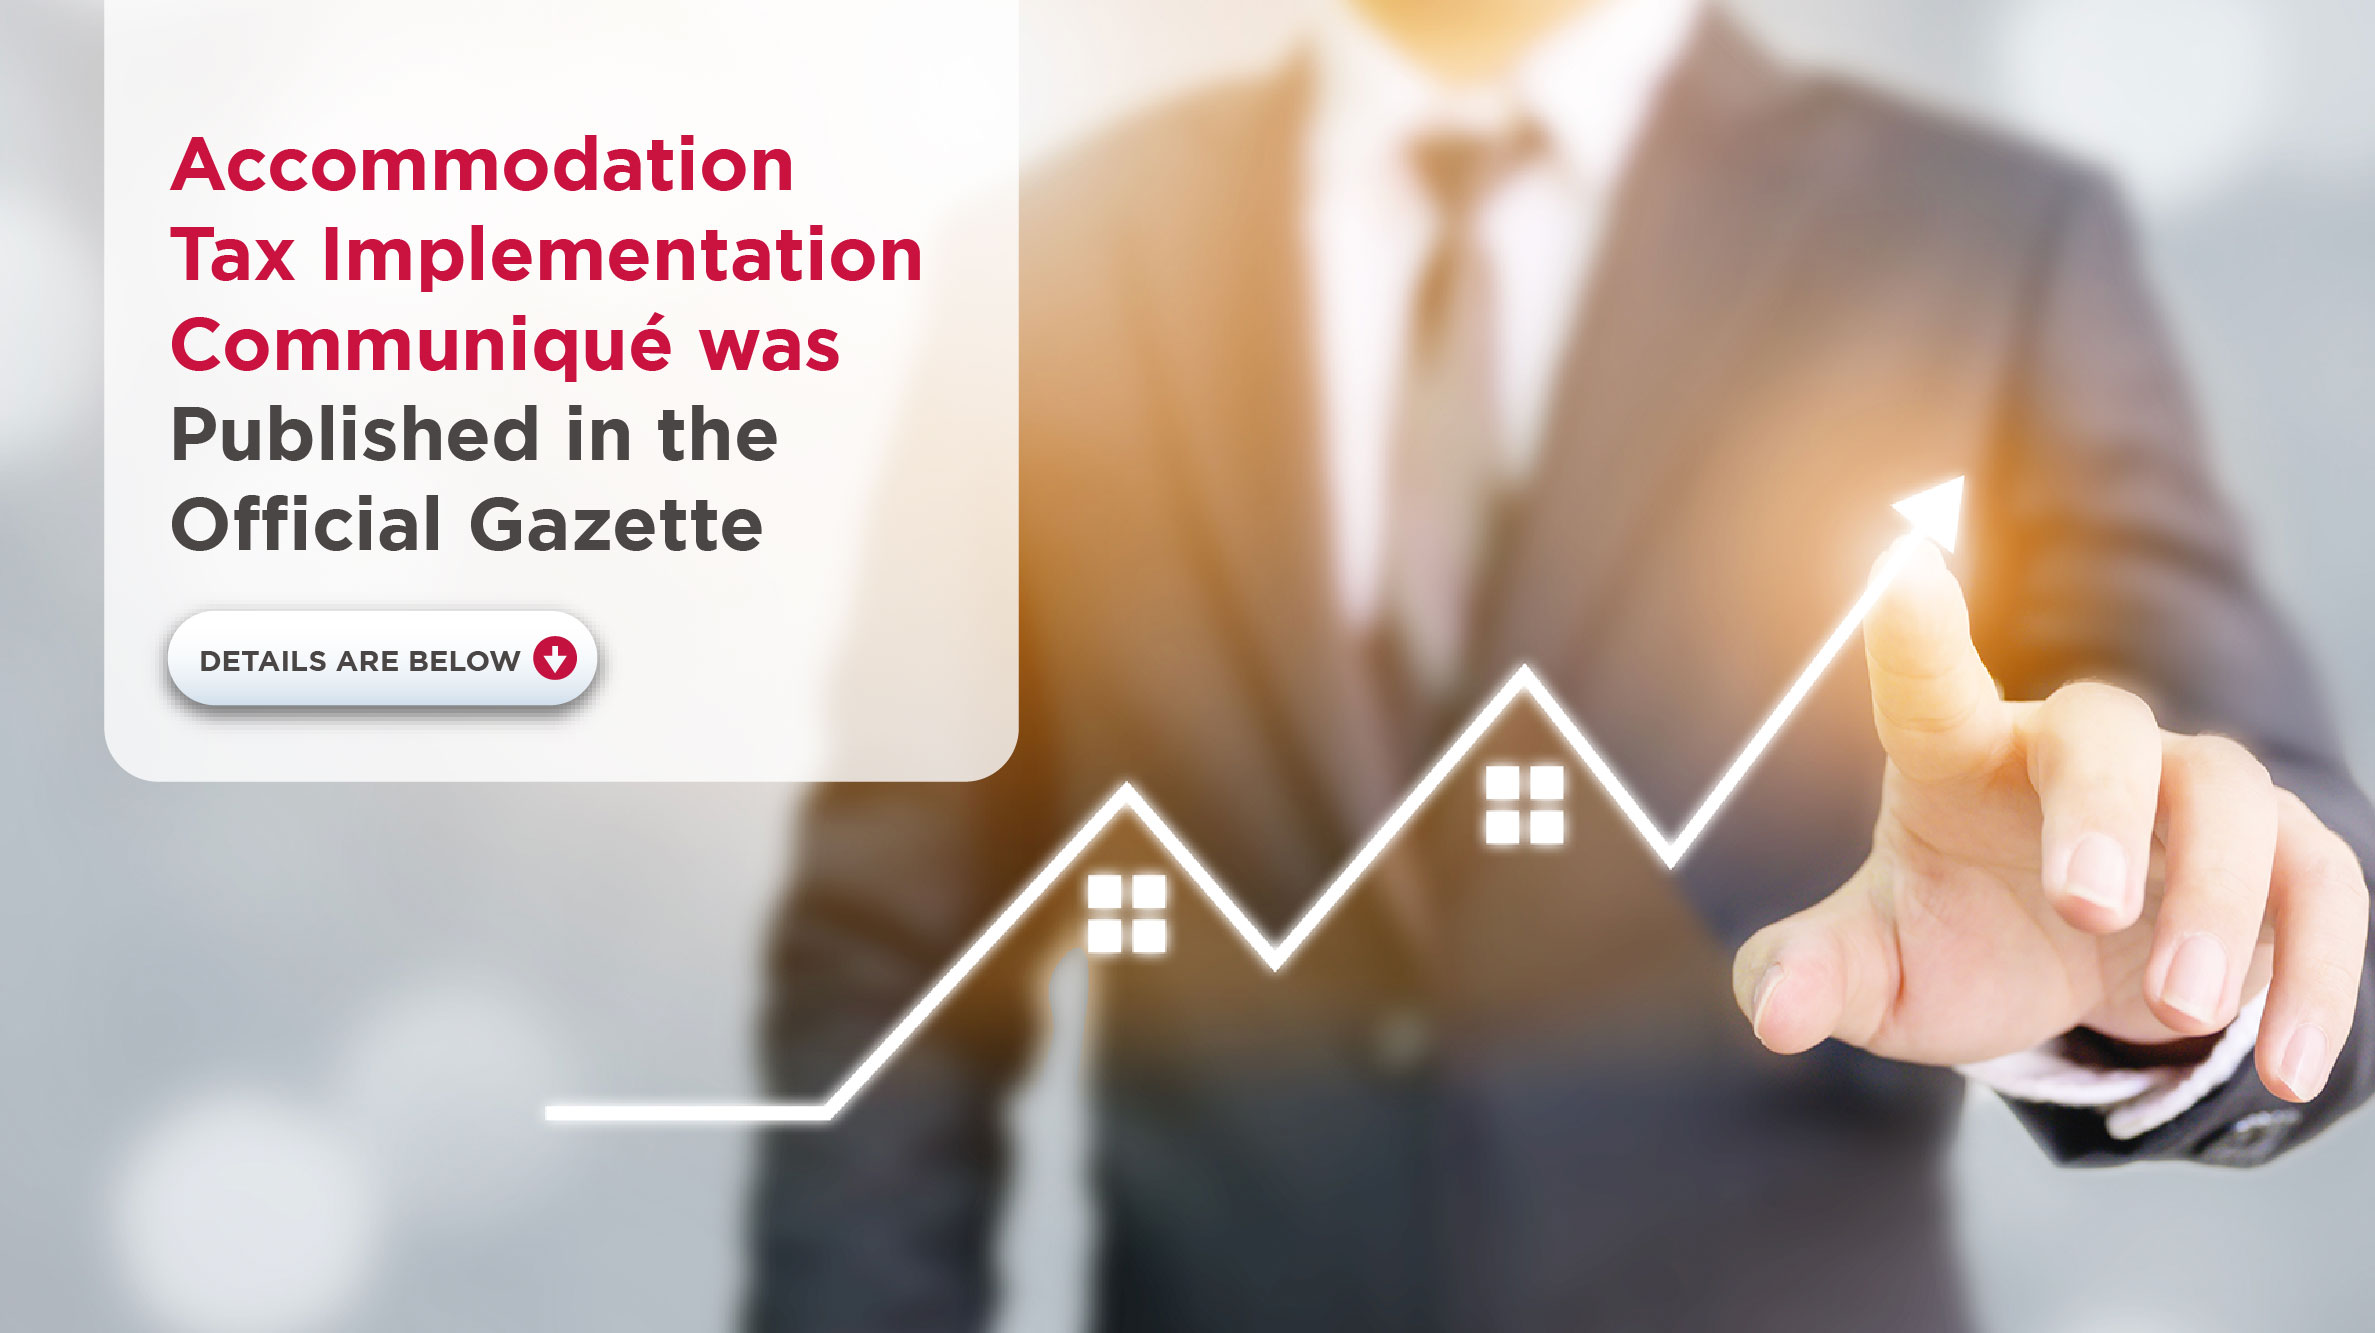 Accommodation Tax Implementation Communique was Published in The Official Gazette